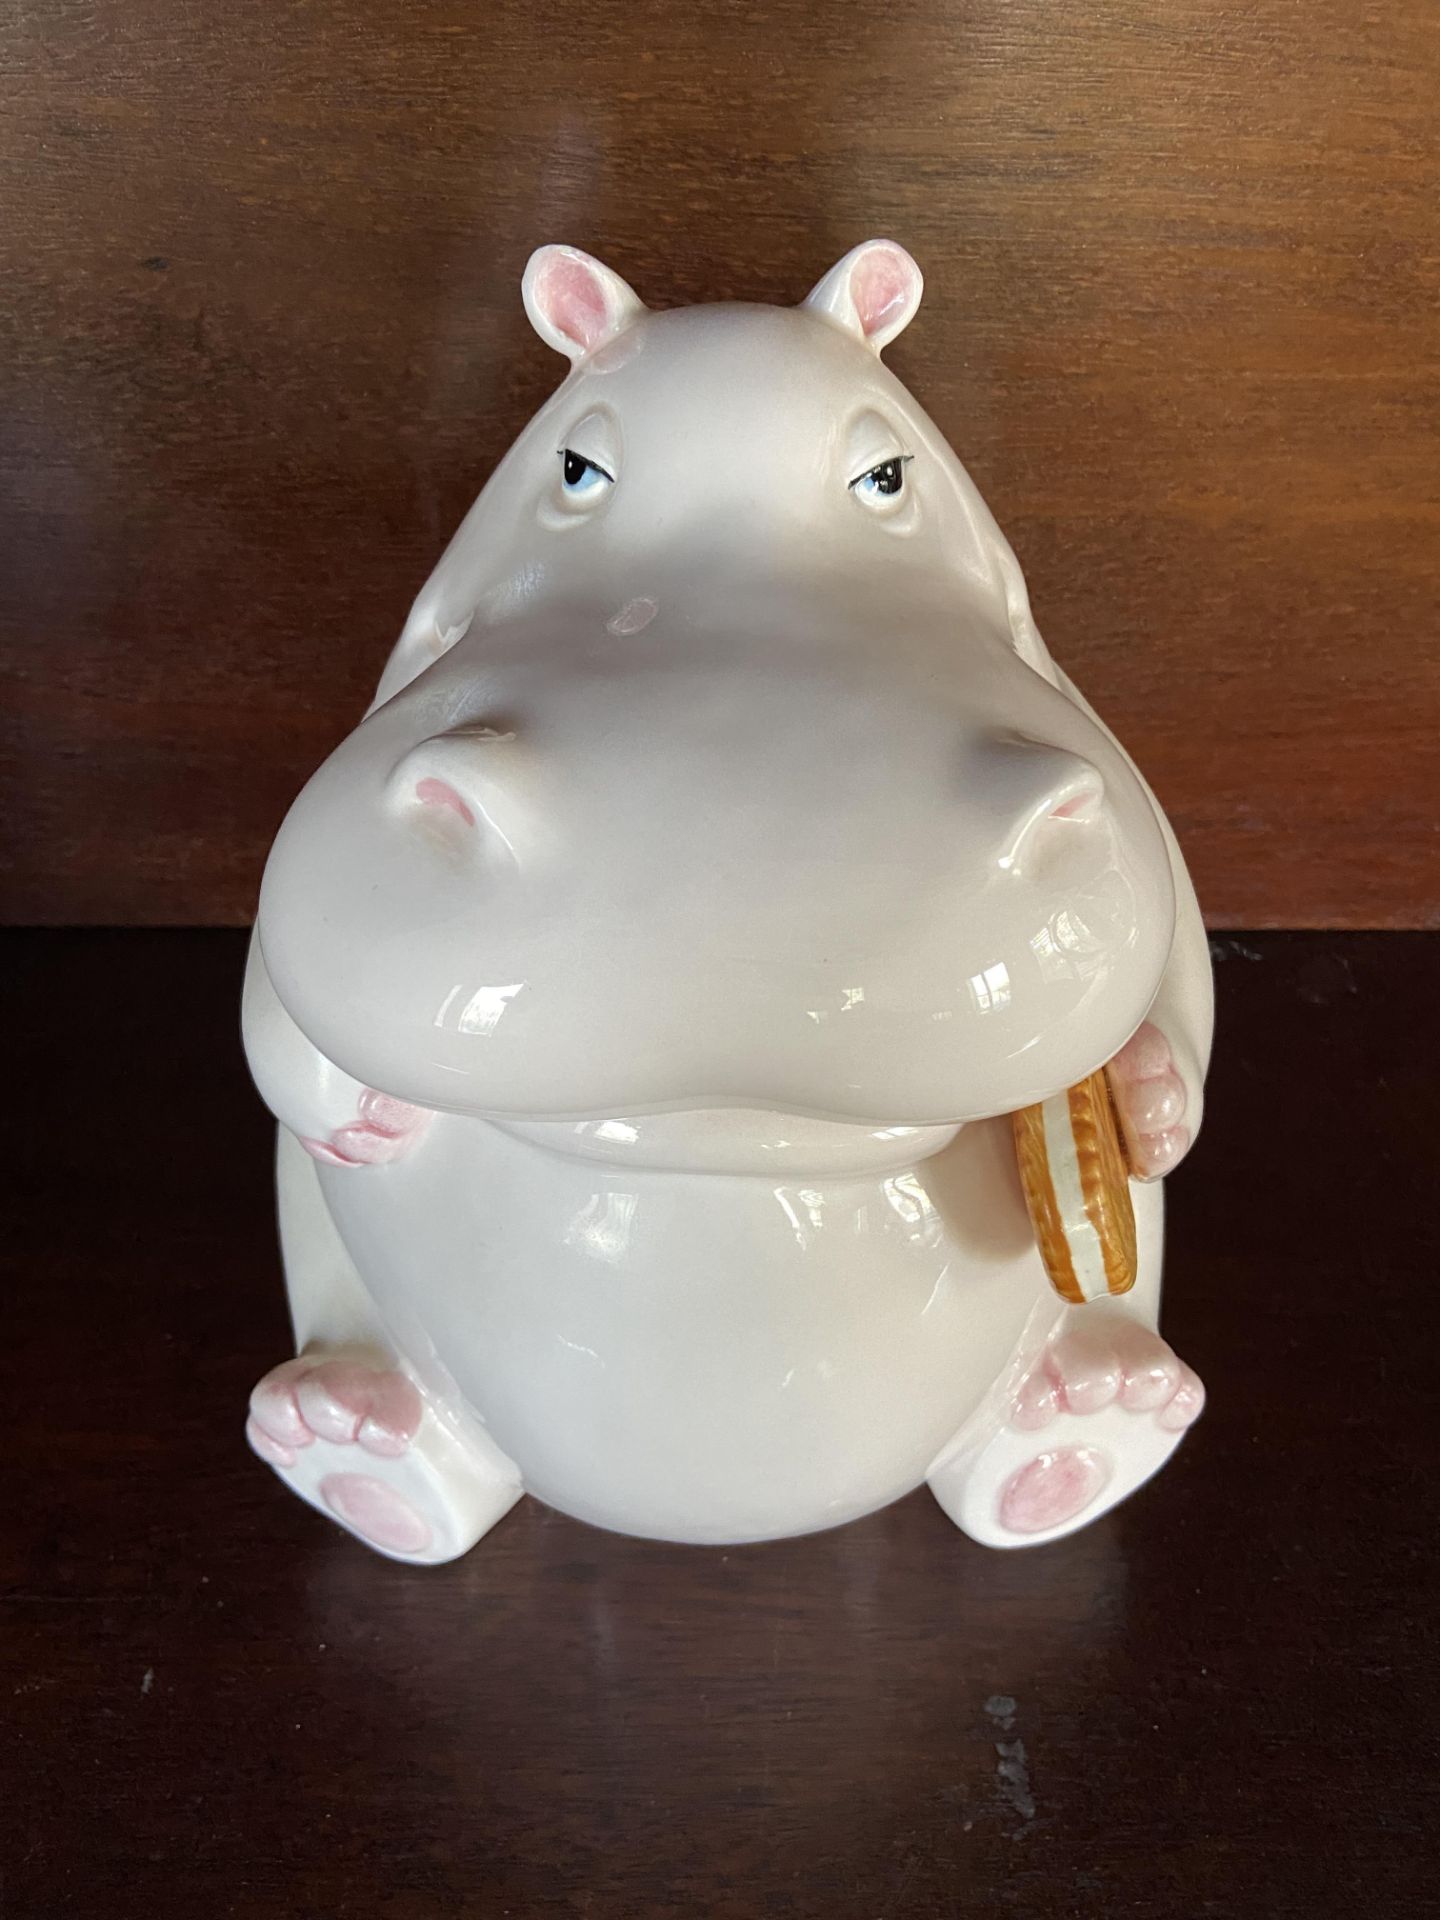 Fitz and Floyd Rare Hippo Cookie Jar - Image 2 of 8